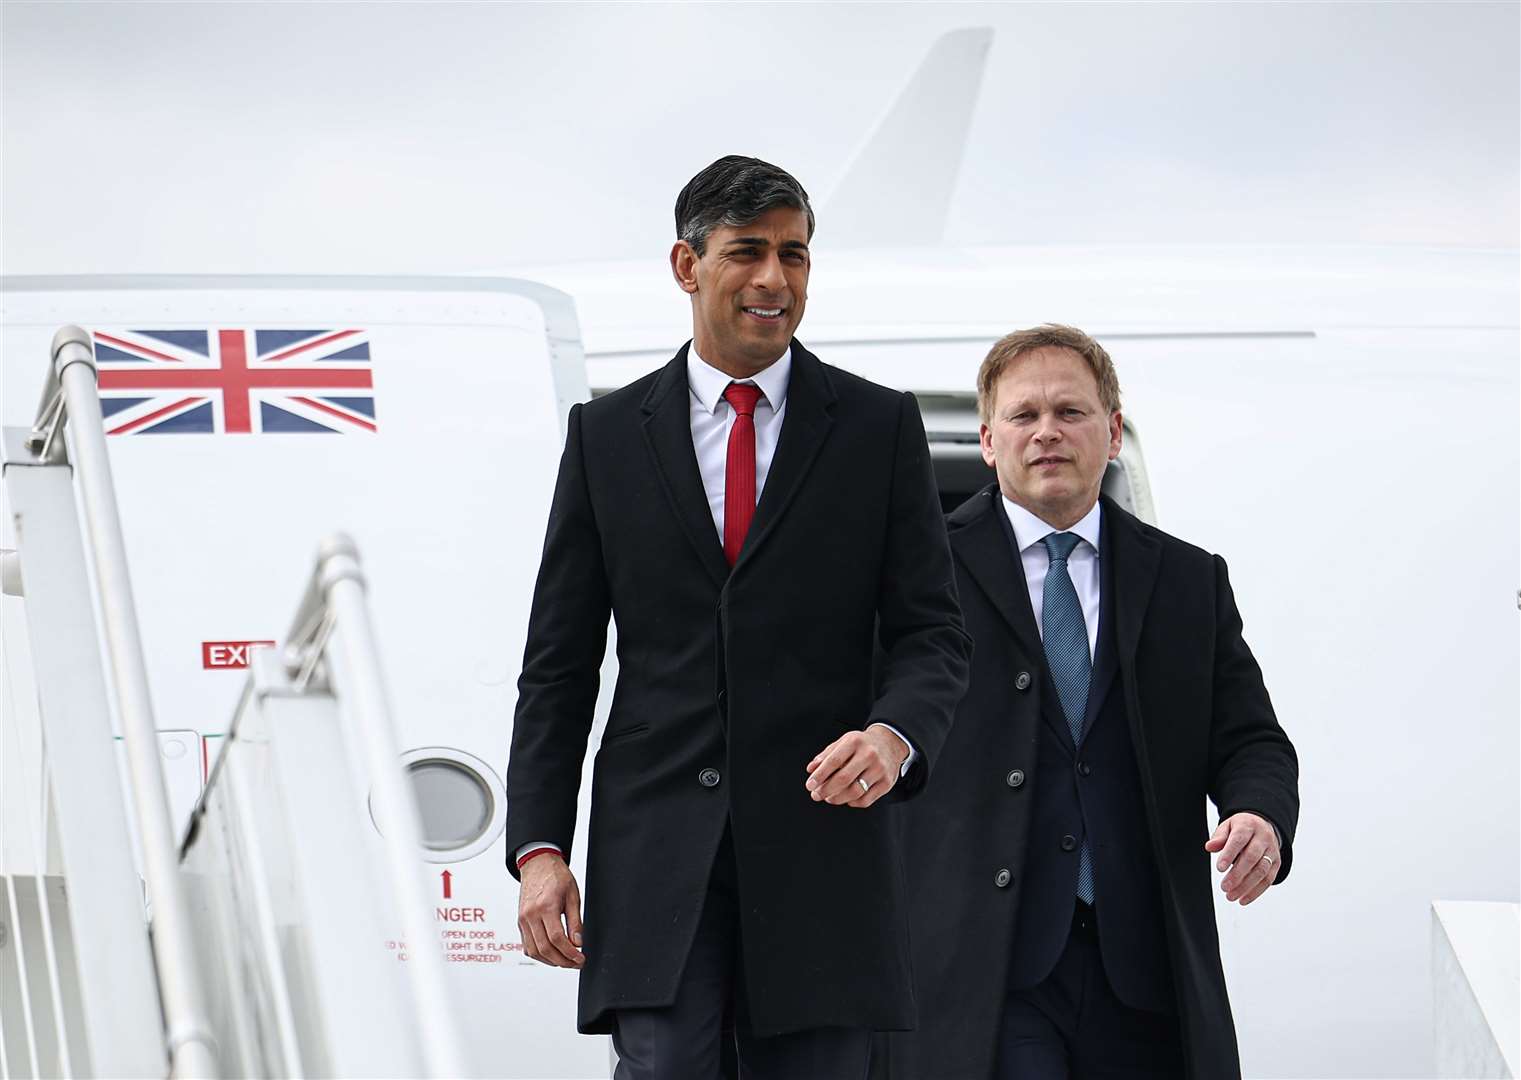 Prime Minister Rishi Sunak said the UK will spend 2.5% of GDP on defence, something that Defence Secretary Grant Shapps has said is ‘precisely what our armed forces need’ (Henry Nicholls/PA)